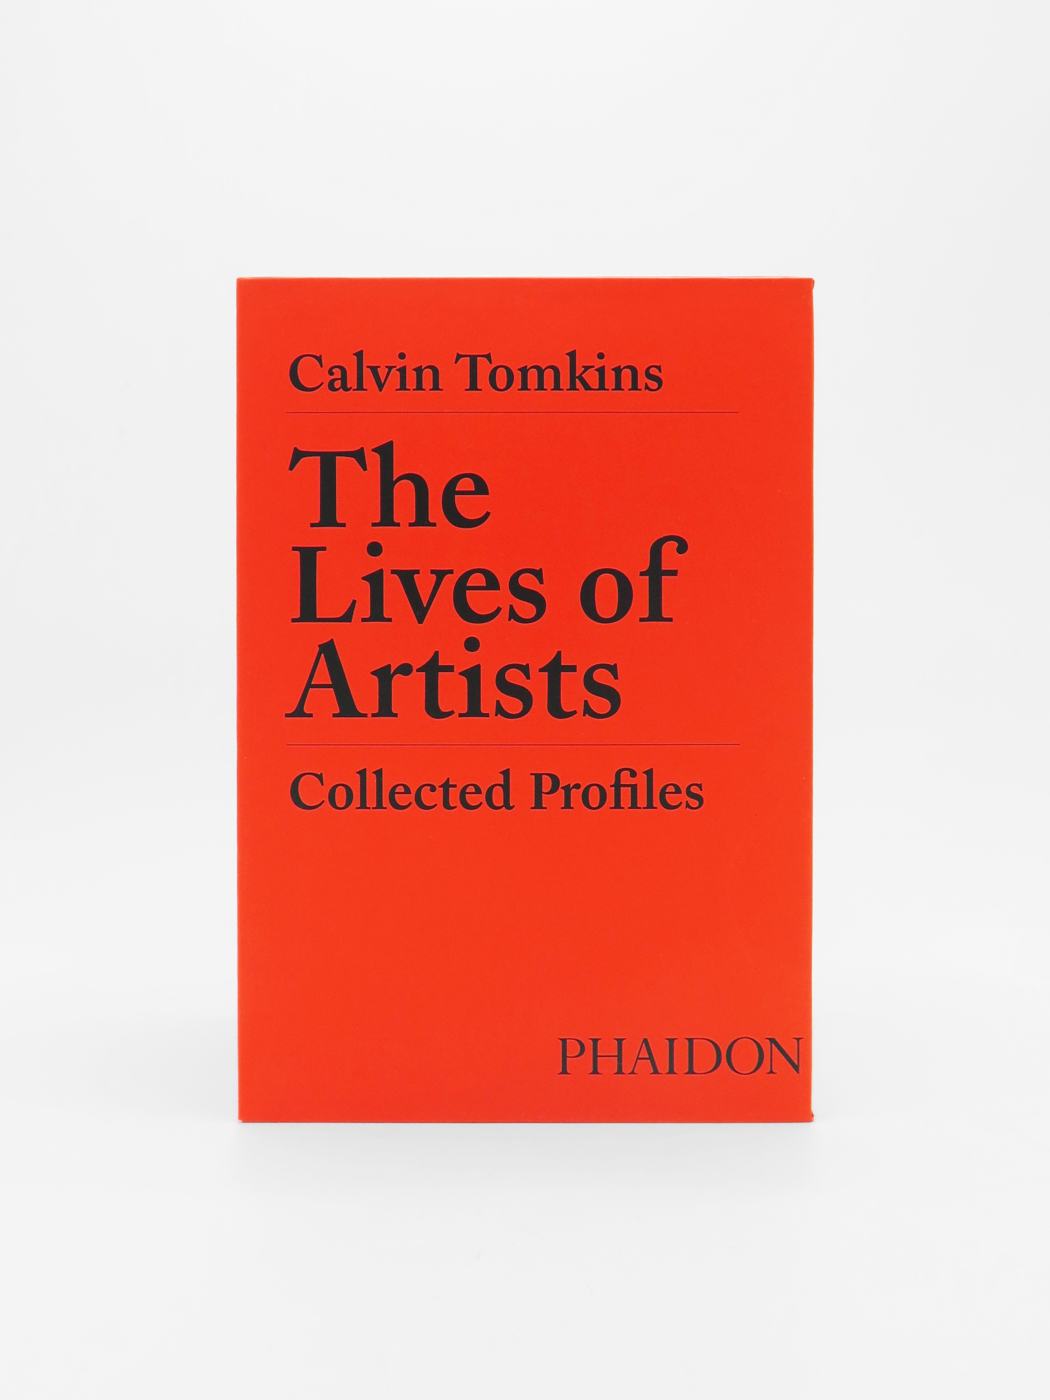 Calvin Tomkins, The Lives of Artists: Collected Profiles